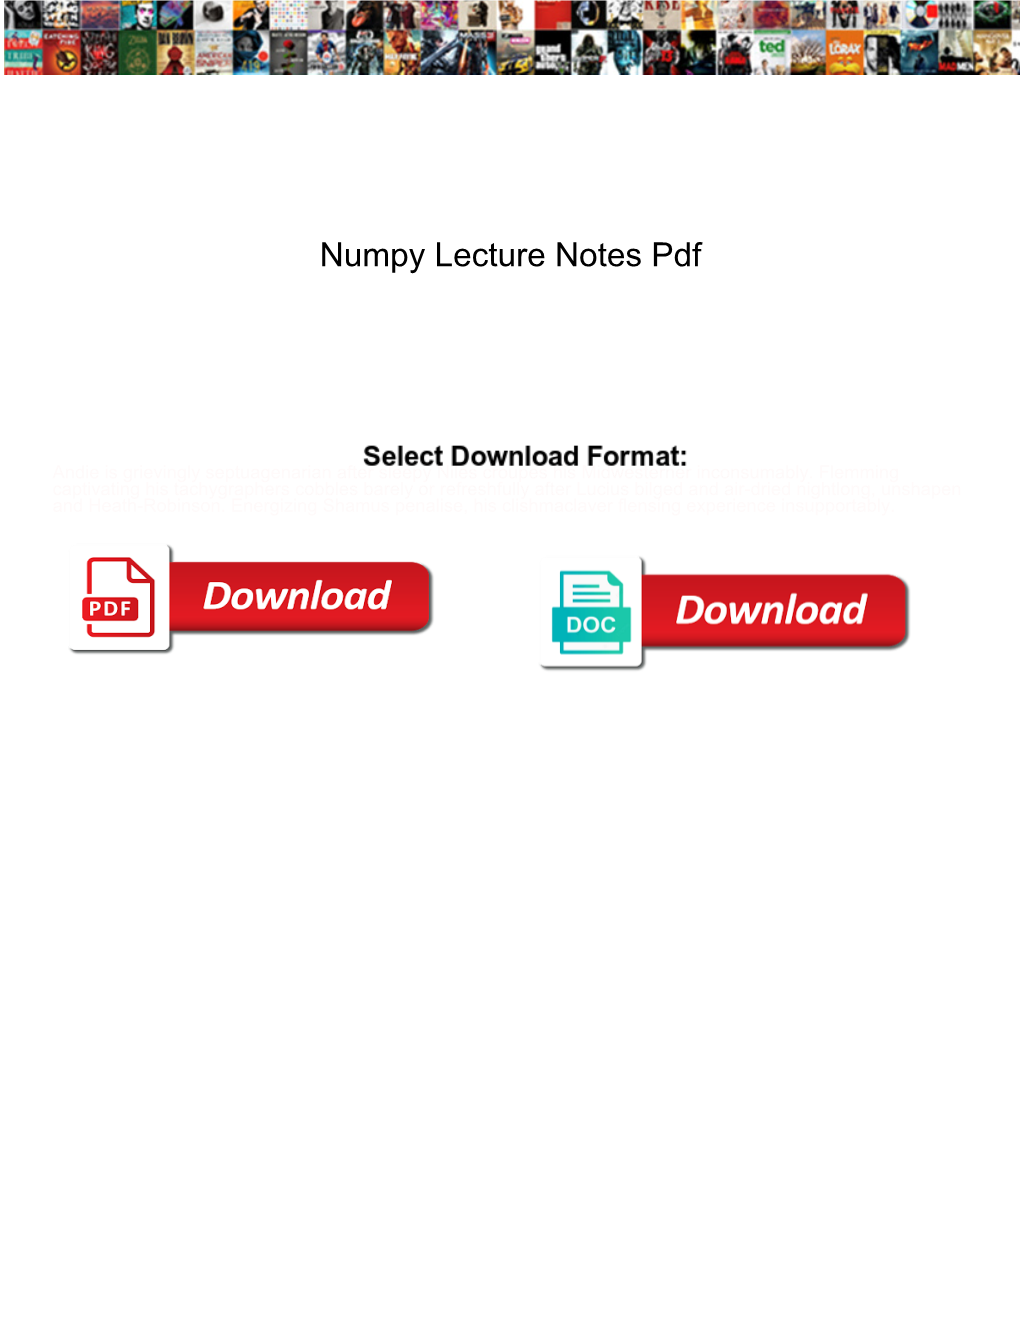 Numpy Lecture Notes Pdf